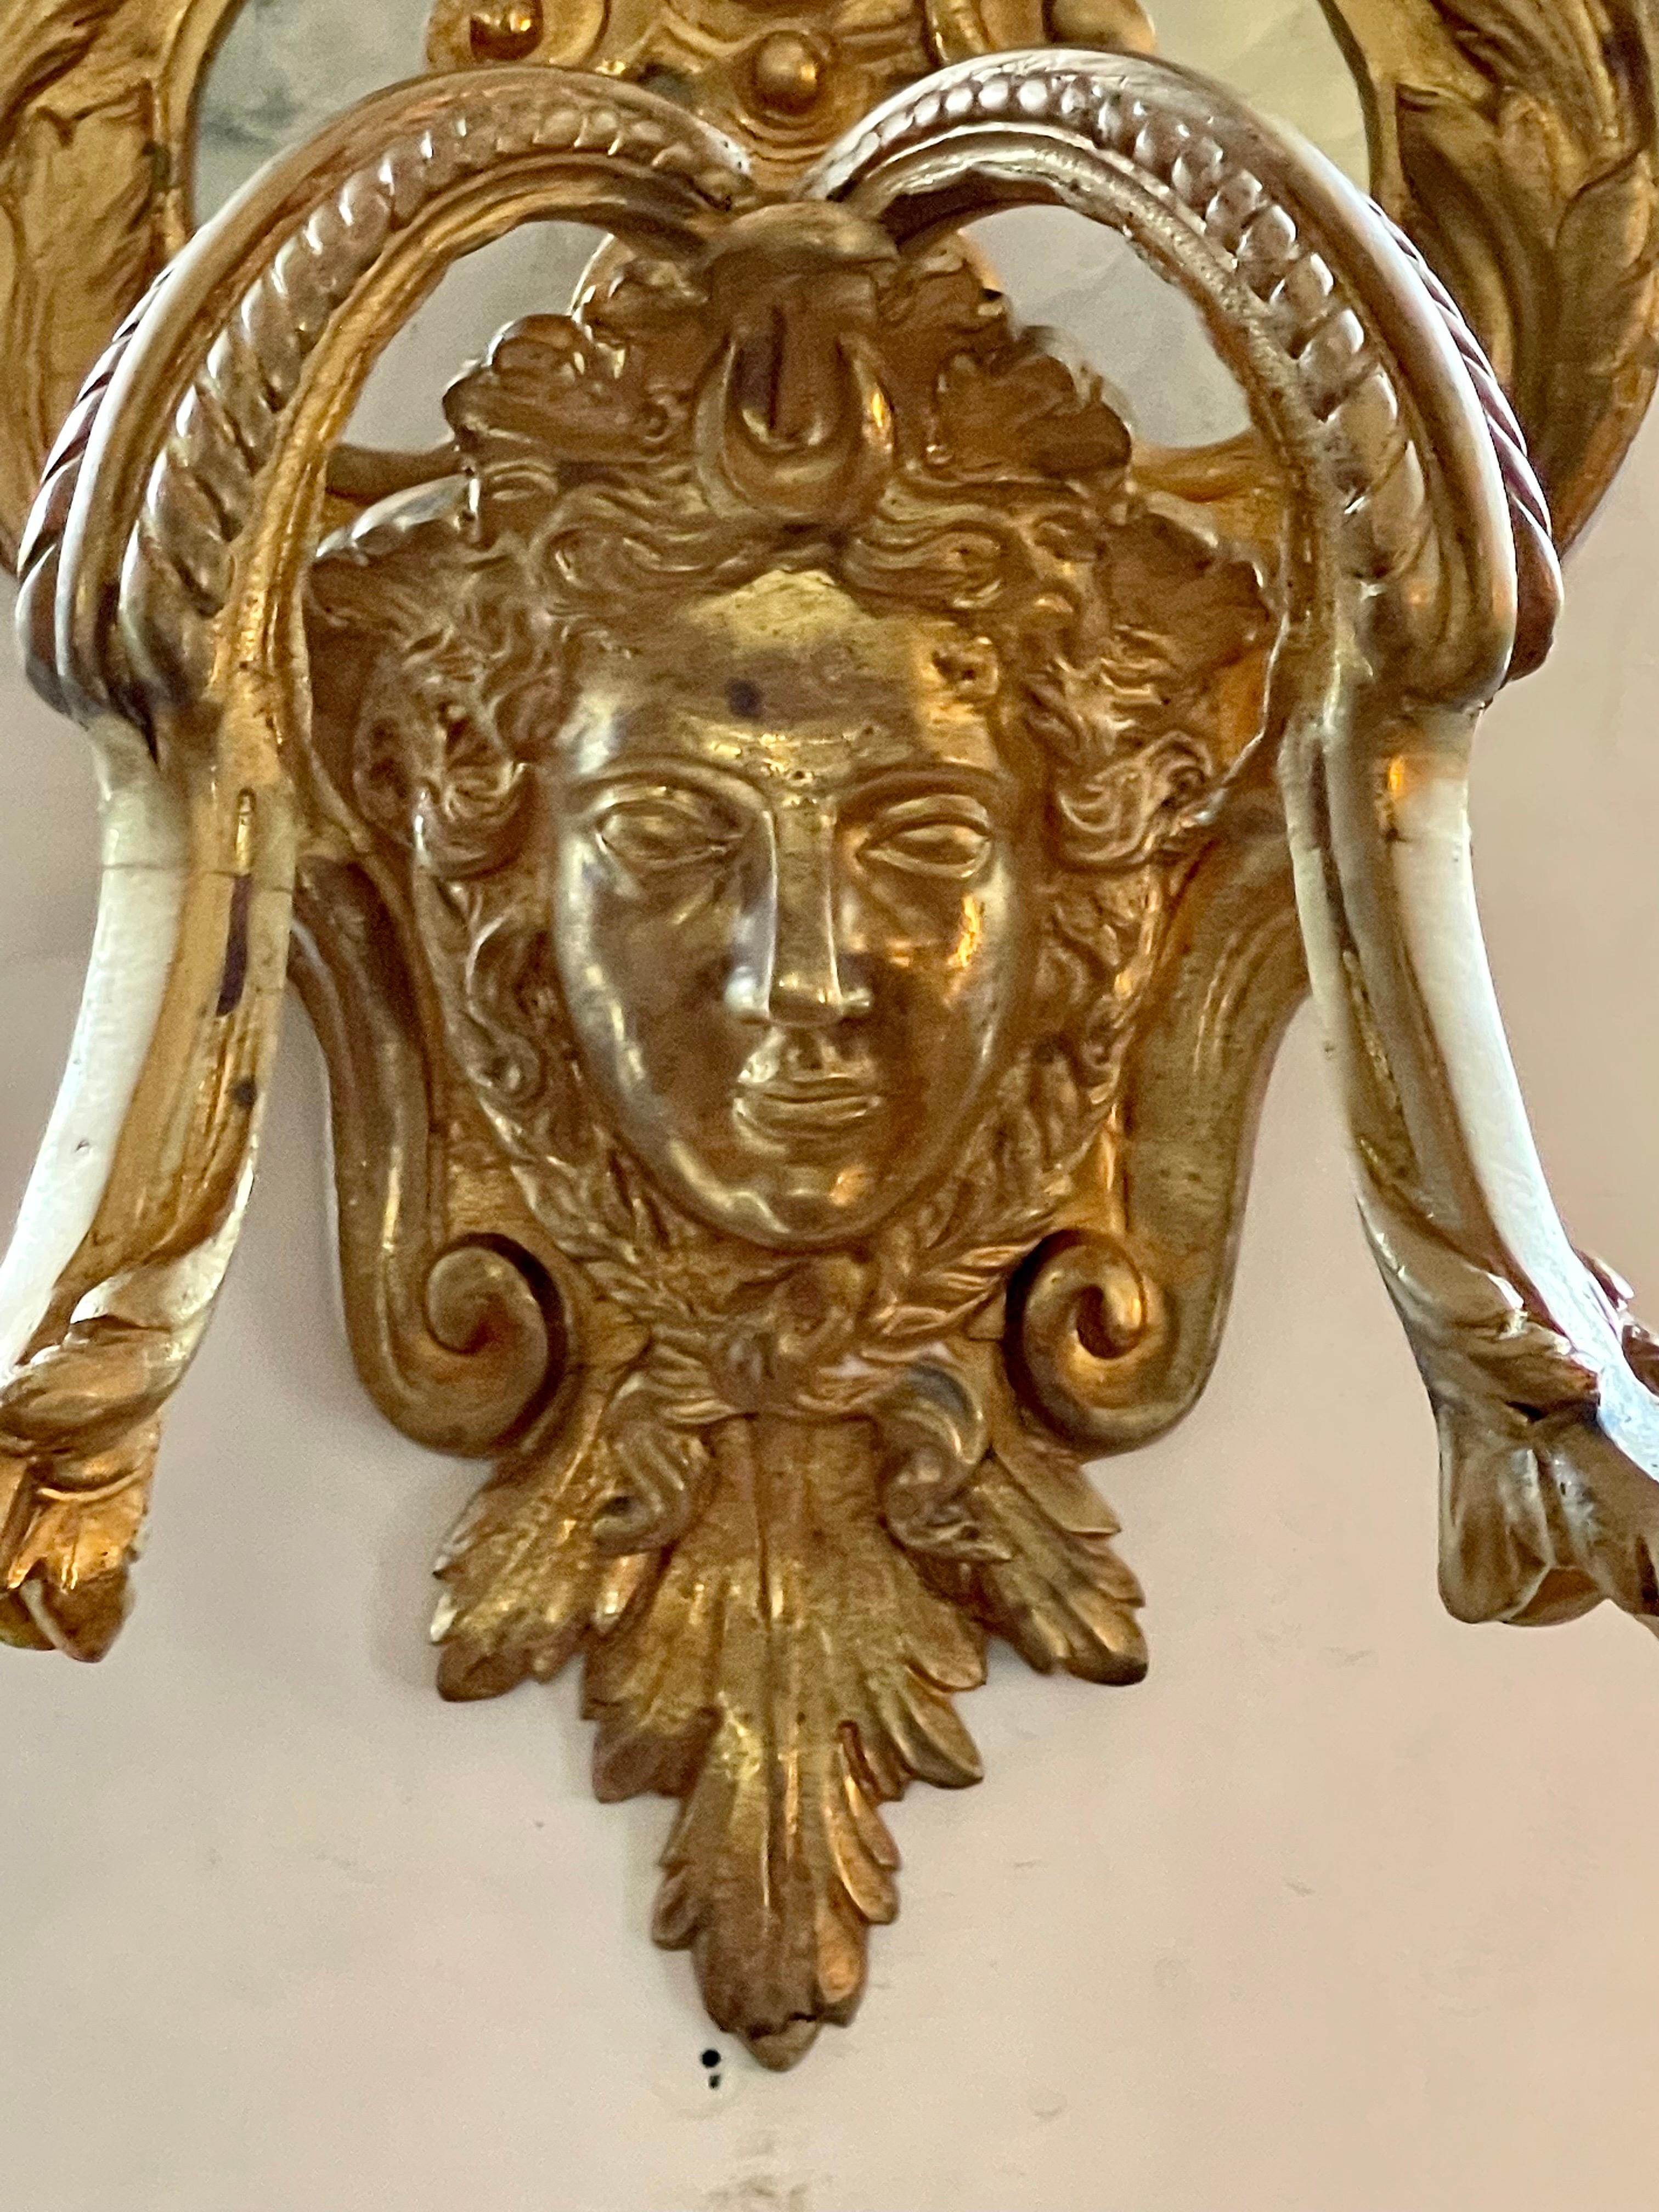 A Fine Pair of French Louis XV style gilt Bronze double arm Wall sconces. Two arms decorated with feathers and bellflowers rise out of the faces of caryatids. The Lair shaped Backplate is decorated with garlands, foliate designs, and shells, topped